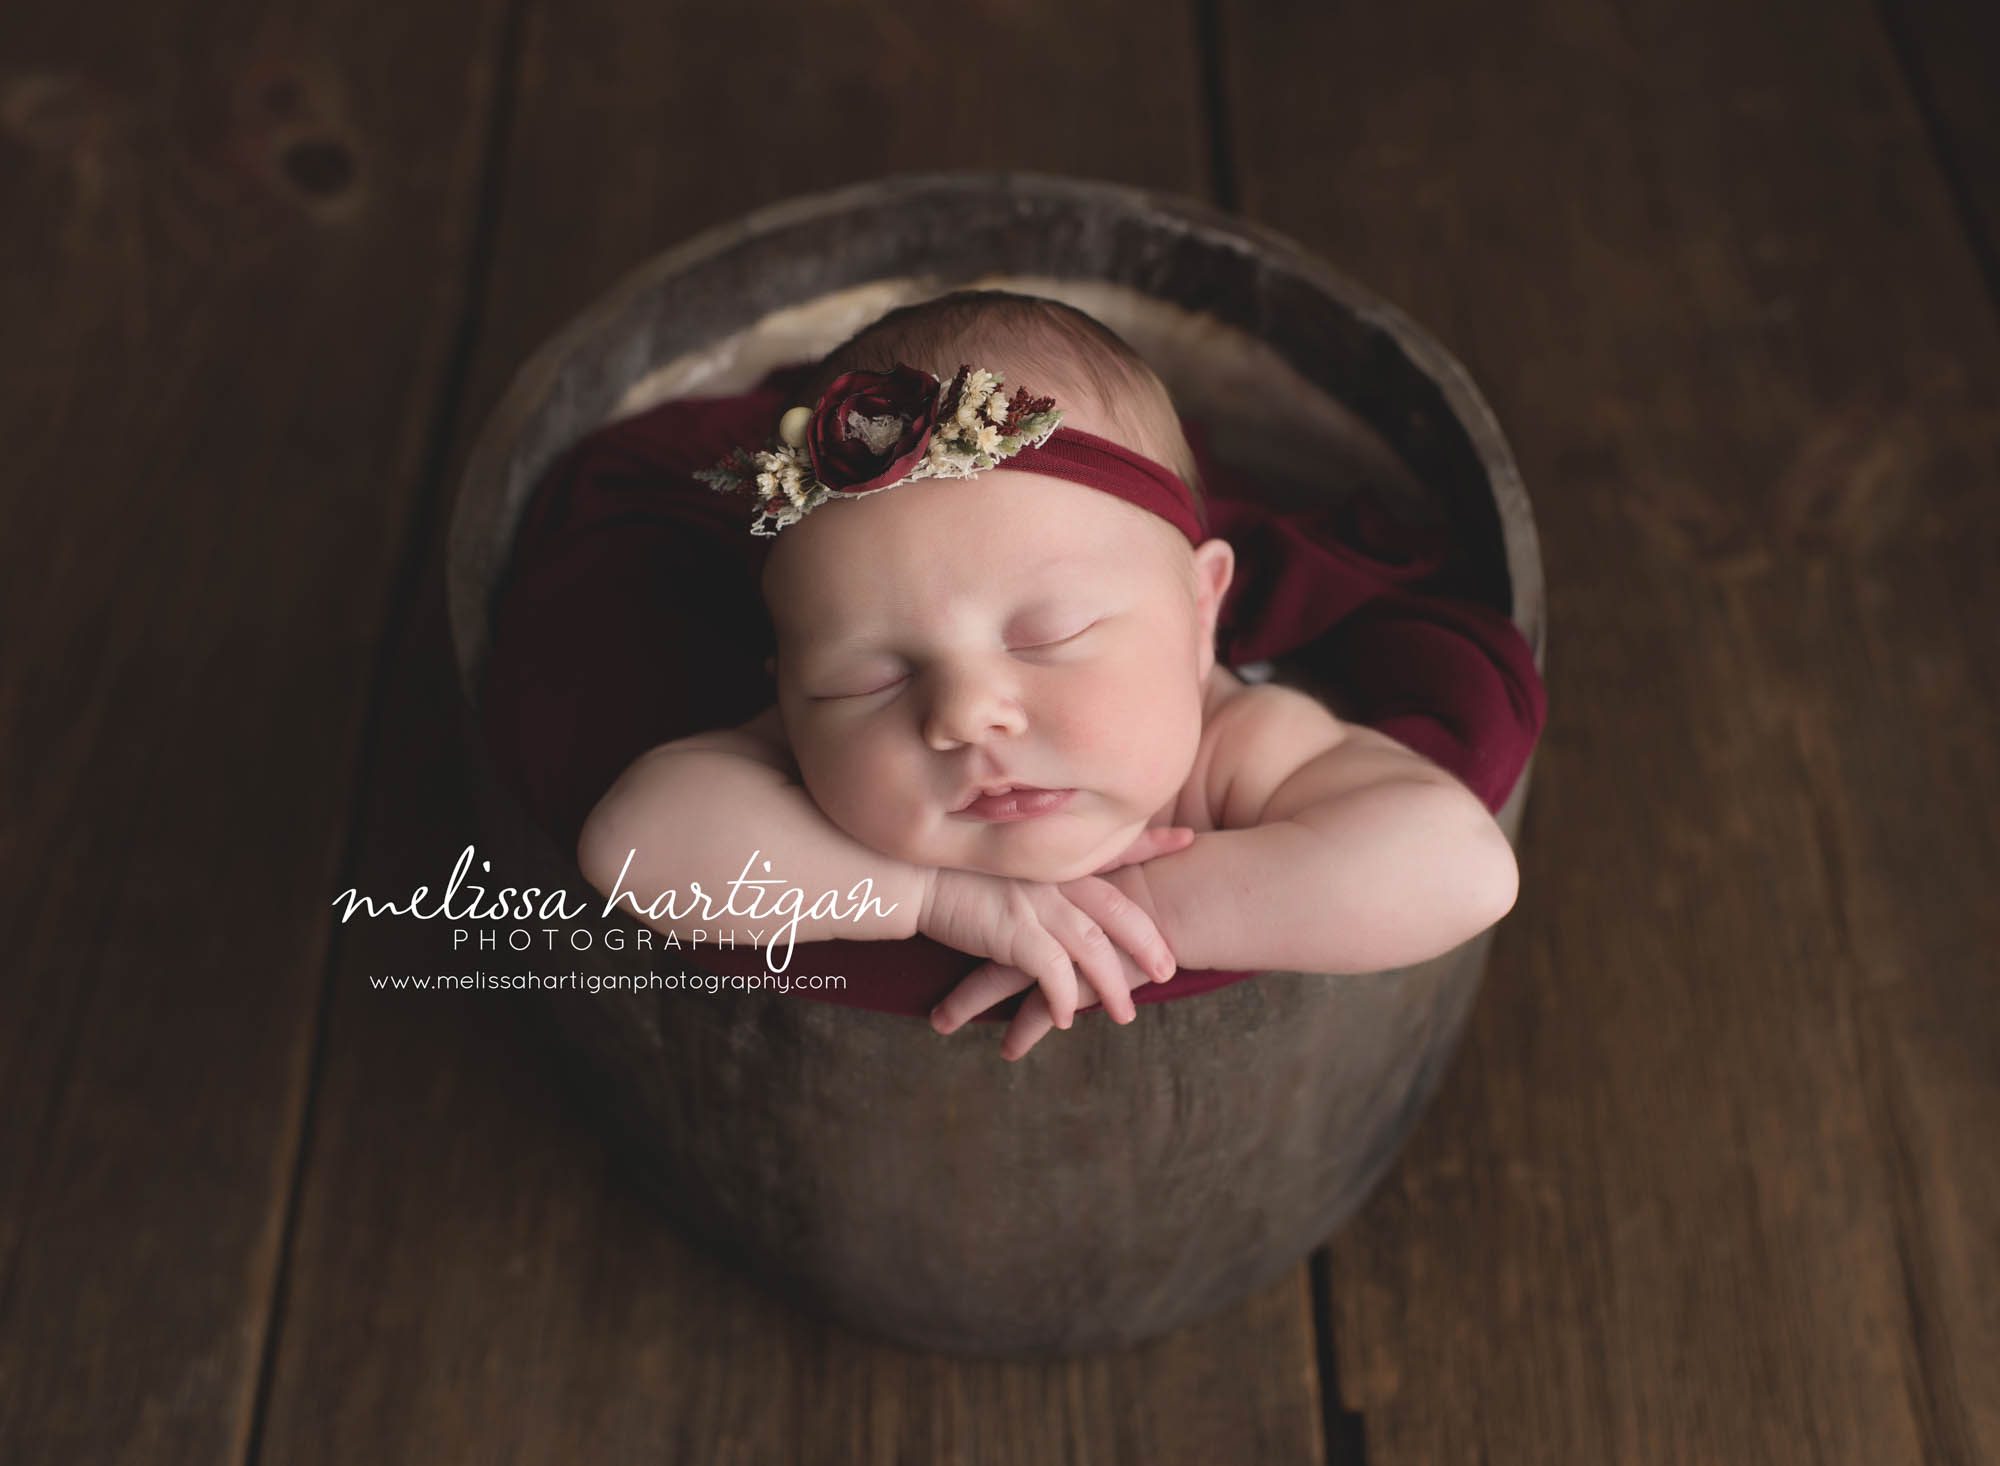 Melissa Hartigan Photography Connecticut Newborn Photographer Coventry Ct Middlefield CT baby Fairfield county Baby girl maroon headband maroon blanket sleeping in wooden bowl head on hands CT newborn session